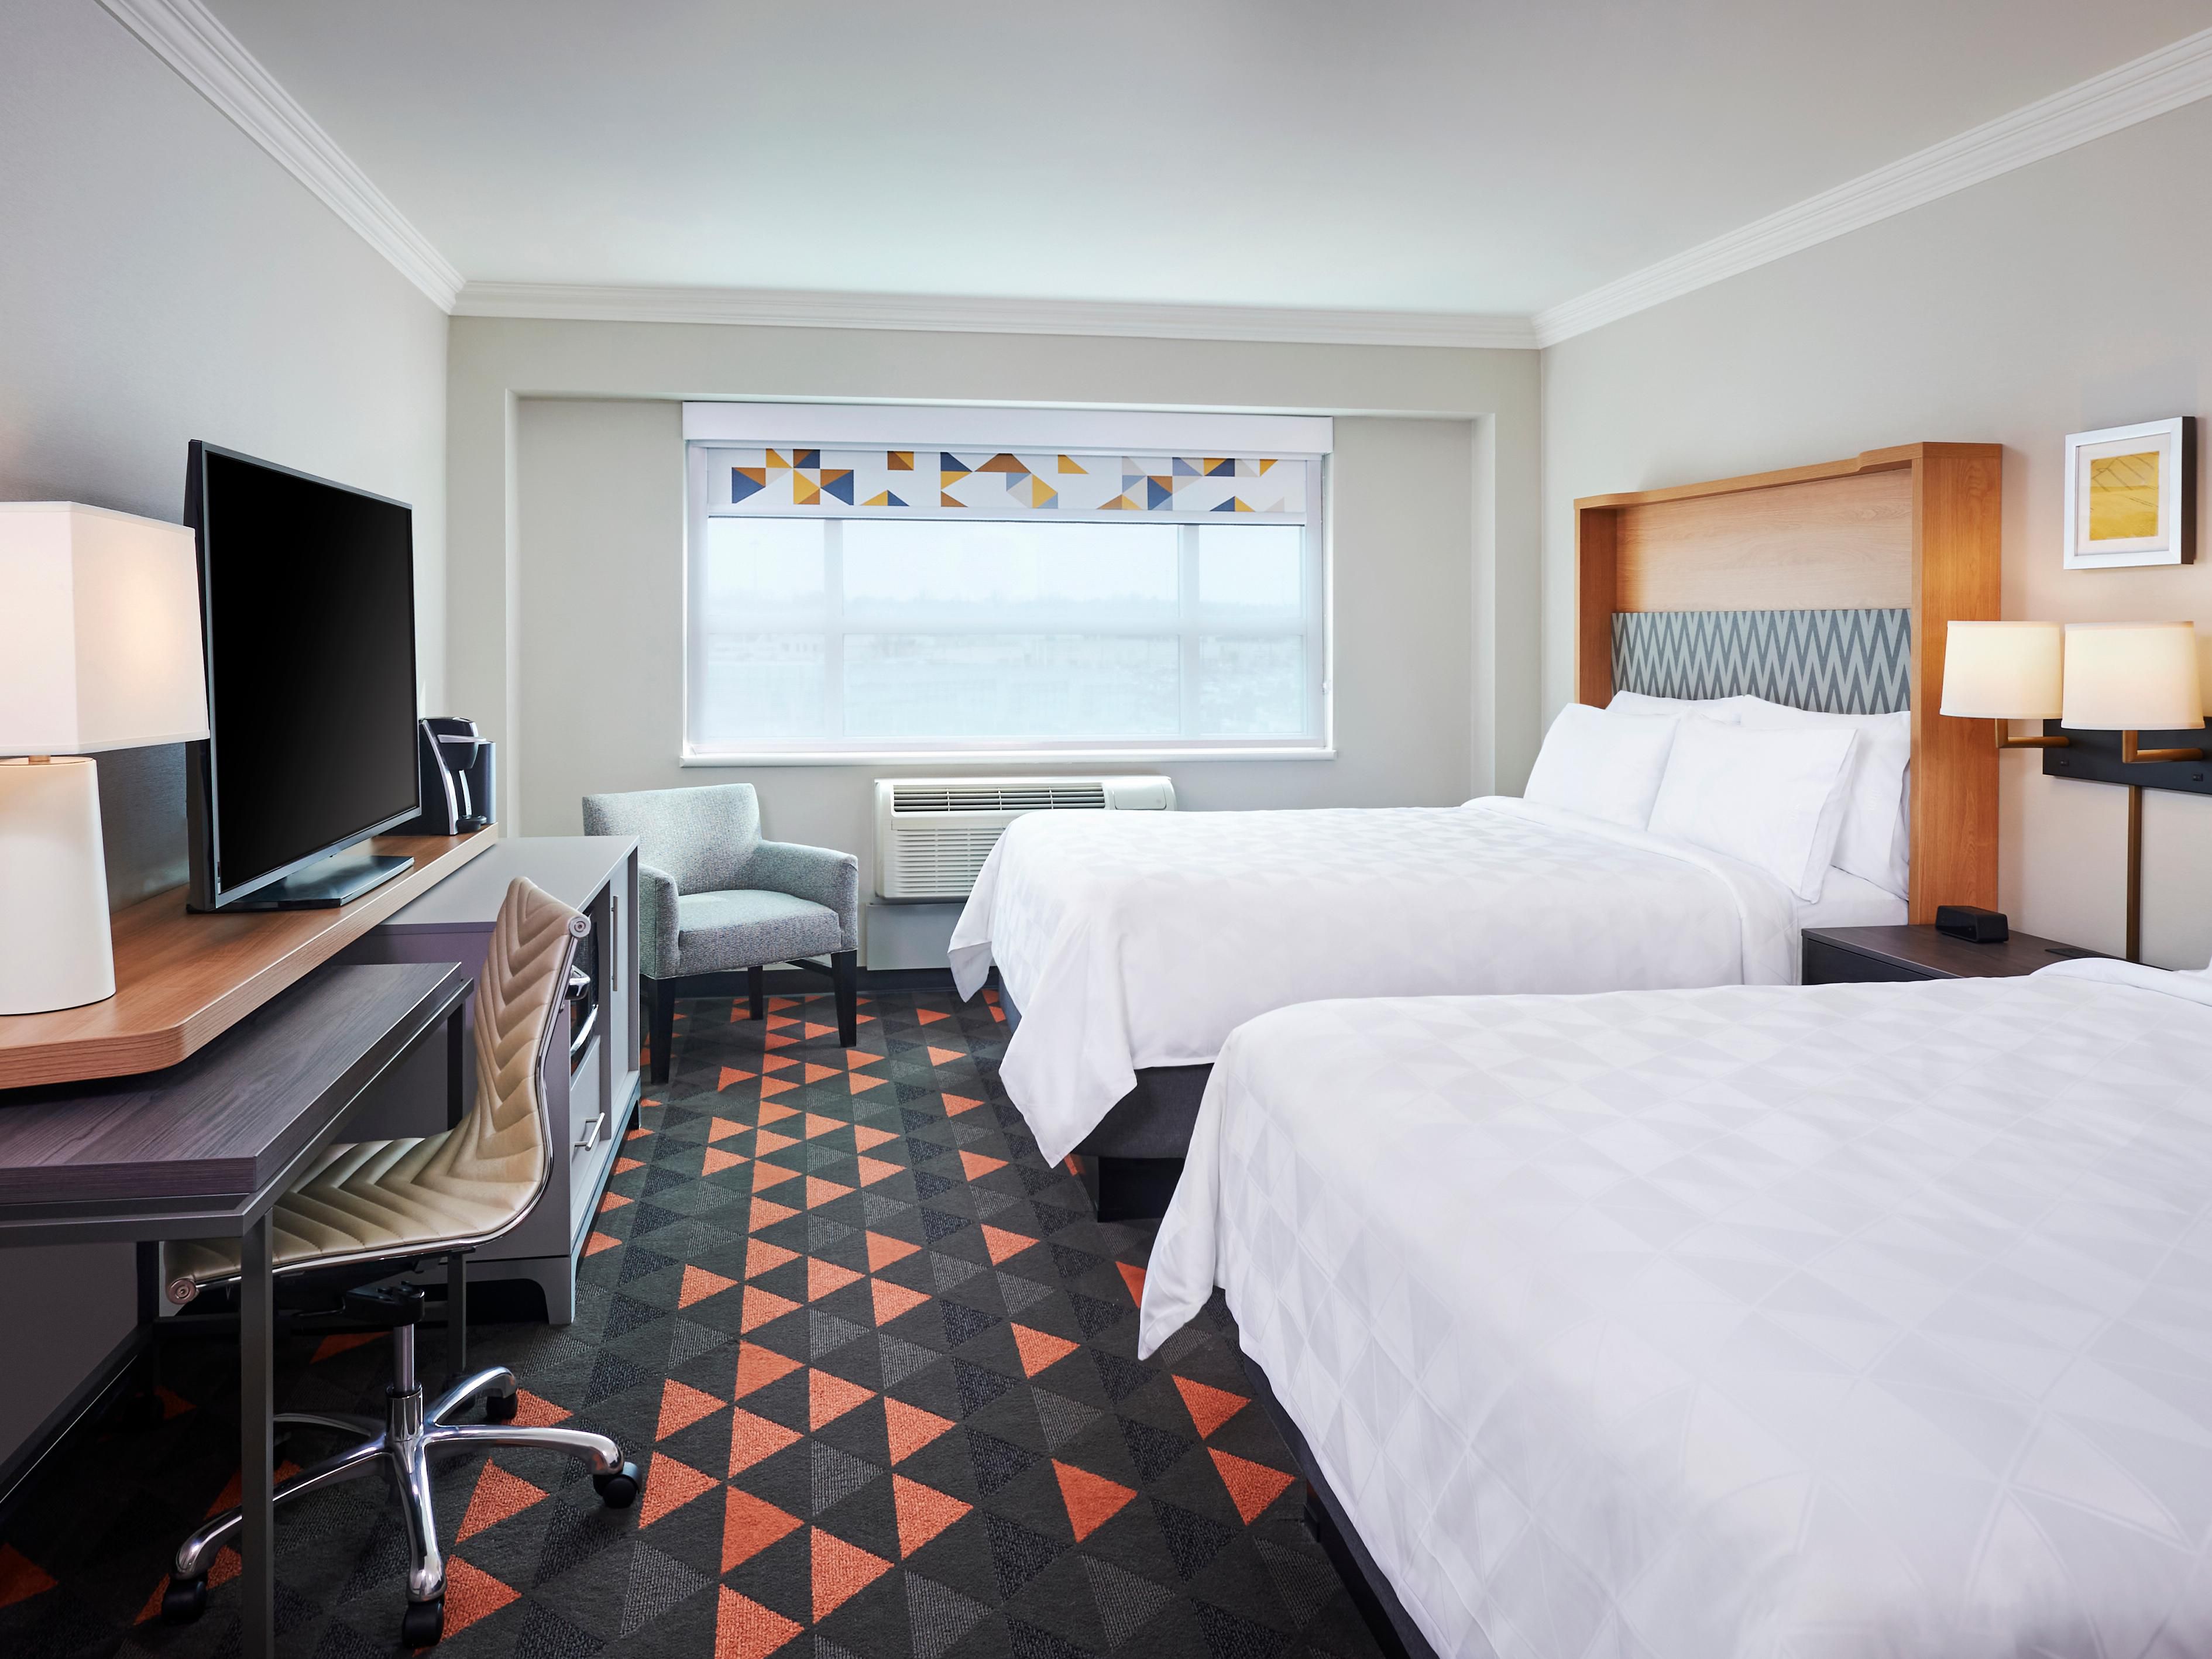 Our comfortable guest rooms are newly renovated. We've taken care of every detail, from fresh white linens and ergonomic chairs to a spacious walk-in shower and thoughtfully designed working nooks. With modern décor that's bright, cheerful, and inviting, our hotel is ready to welcome you in.  